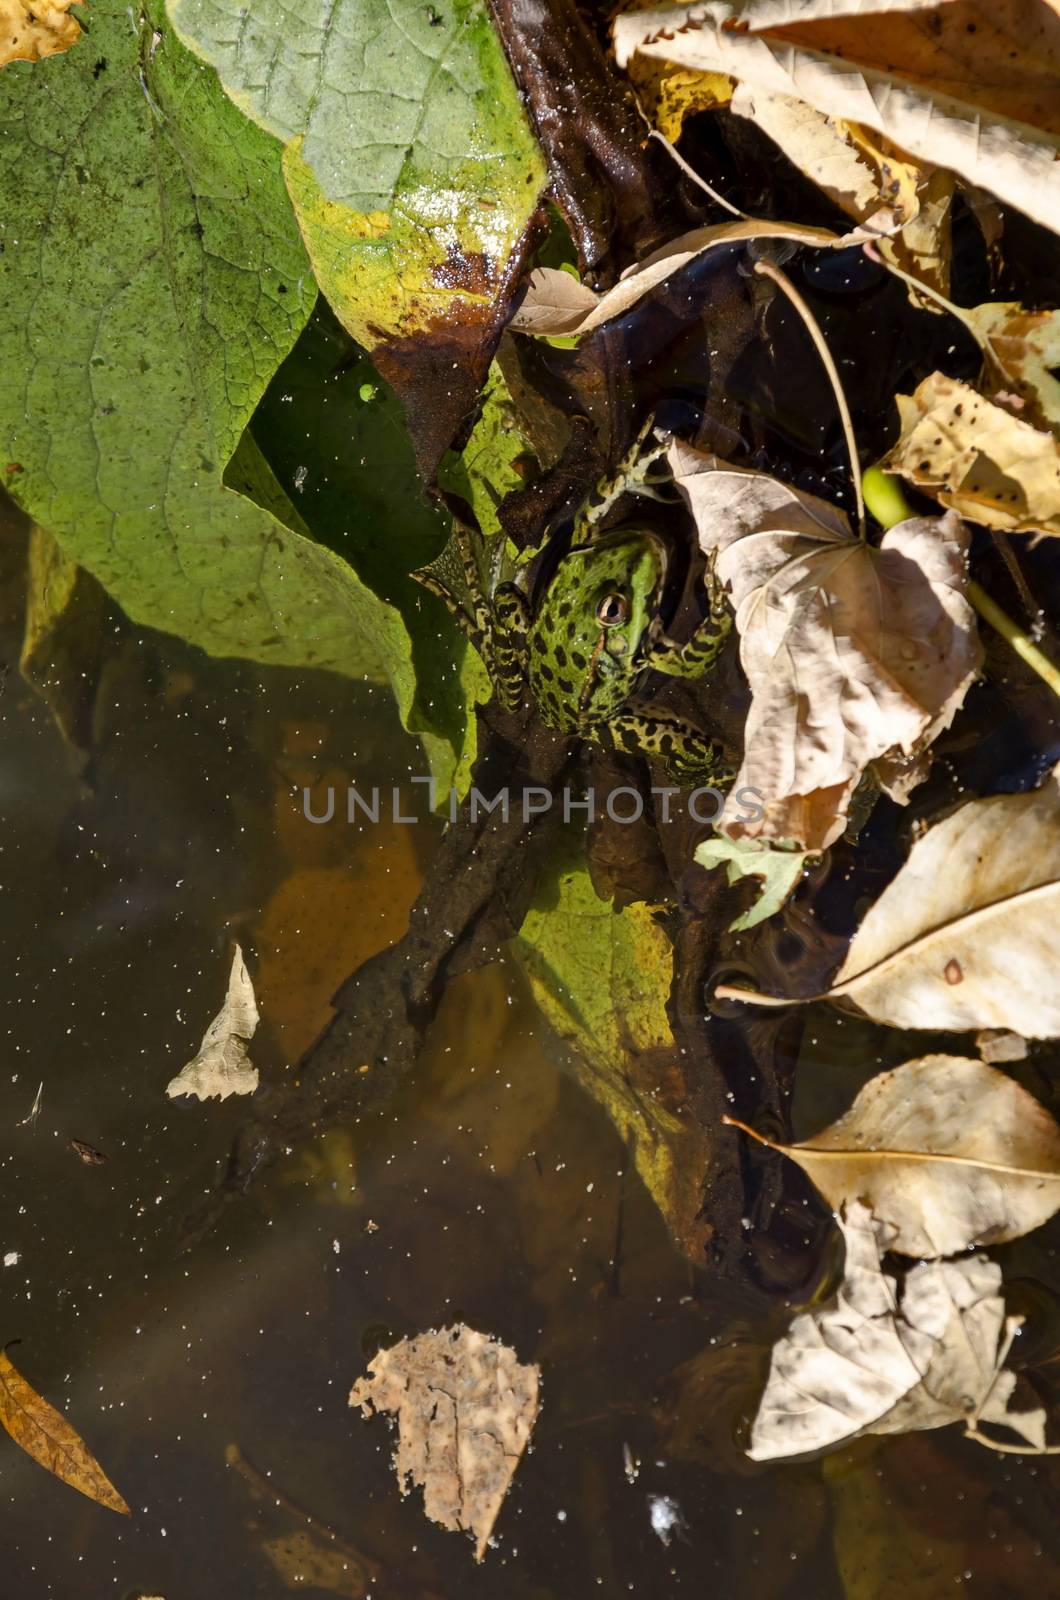 Lake with colorful autumn leaves and a green frog or Rana in the water, Vrana park, Sofia, Bulgaria